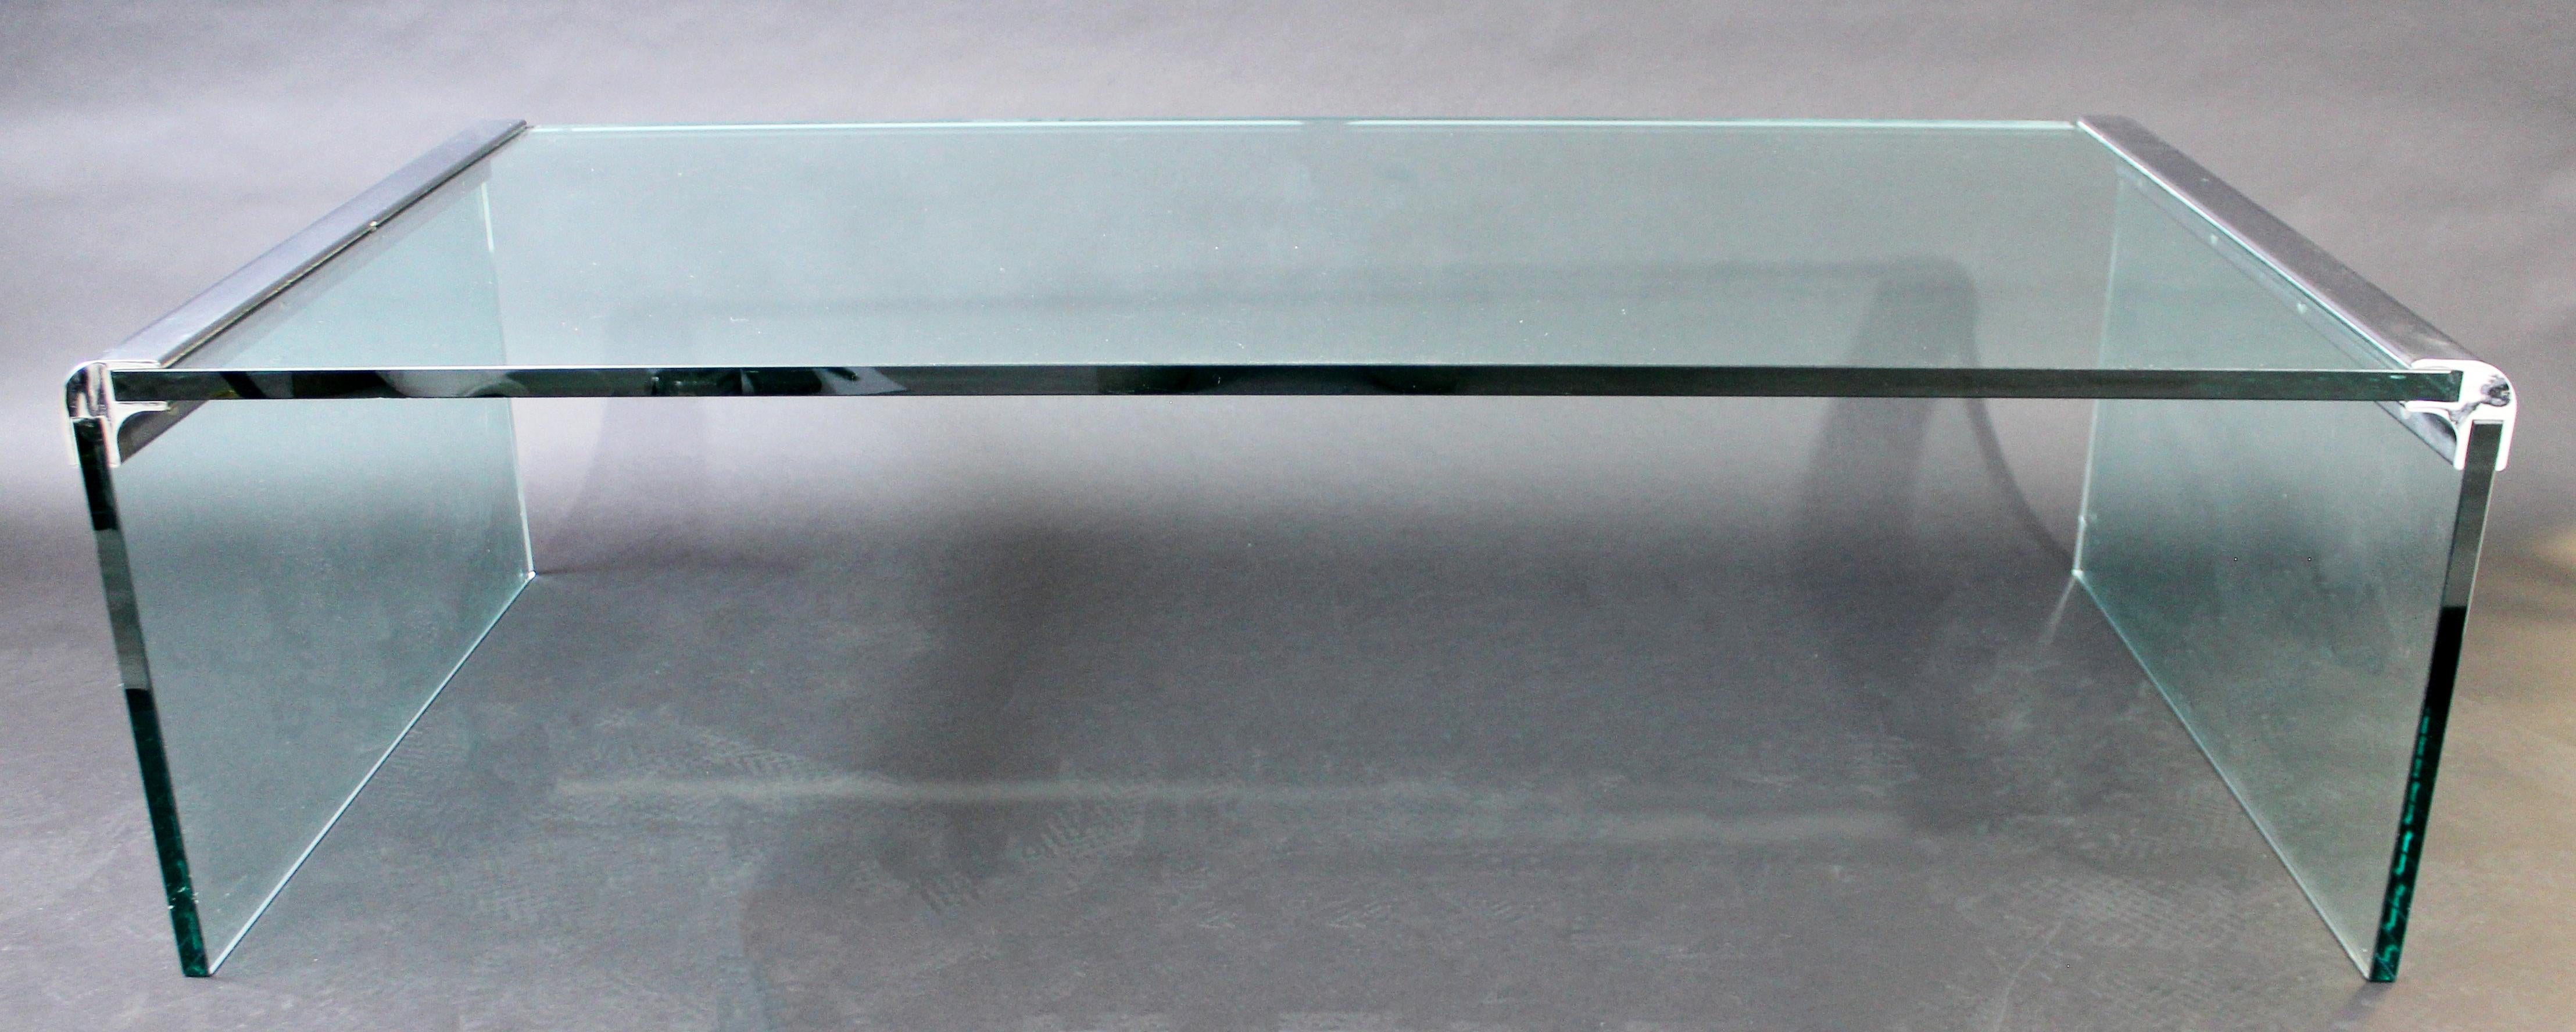 For your consideration is a wonderful, waterfall coffee table, made of chrome and three pieces of glass, by Pace, circa 1970s. In excellent condition, but with some surface scratches in the glass. The dimensions are 56.6